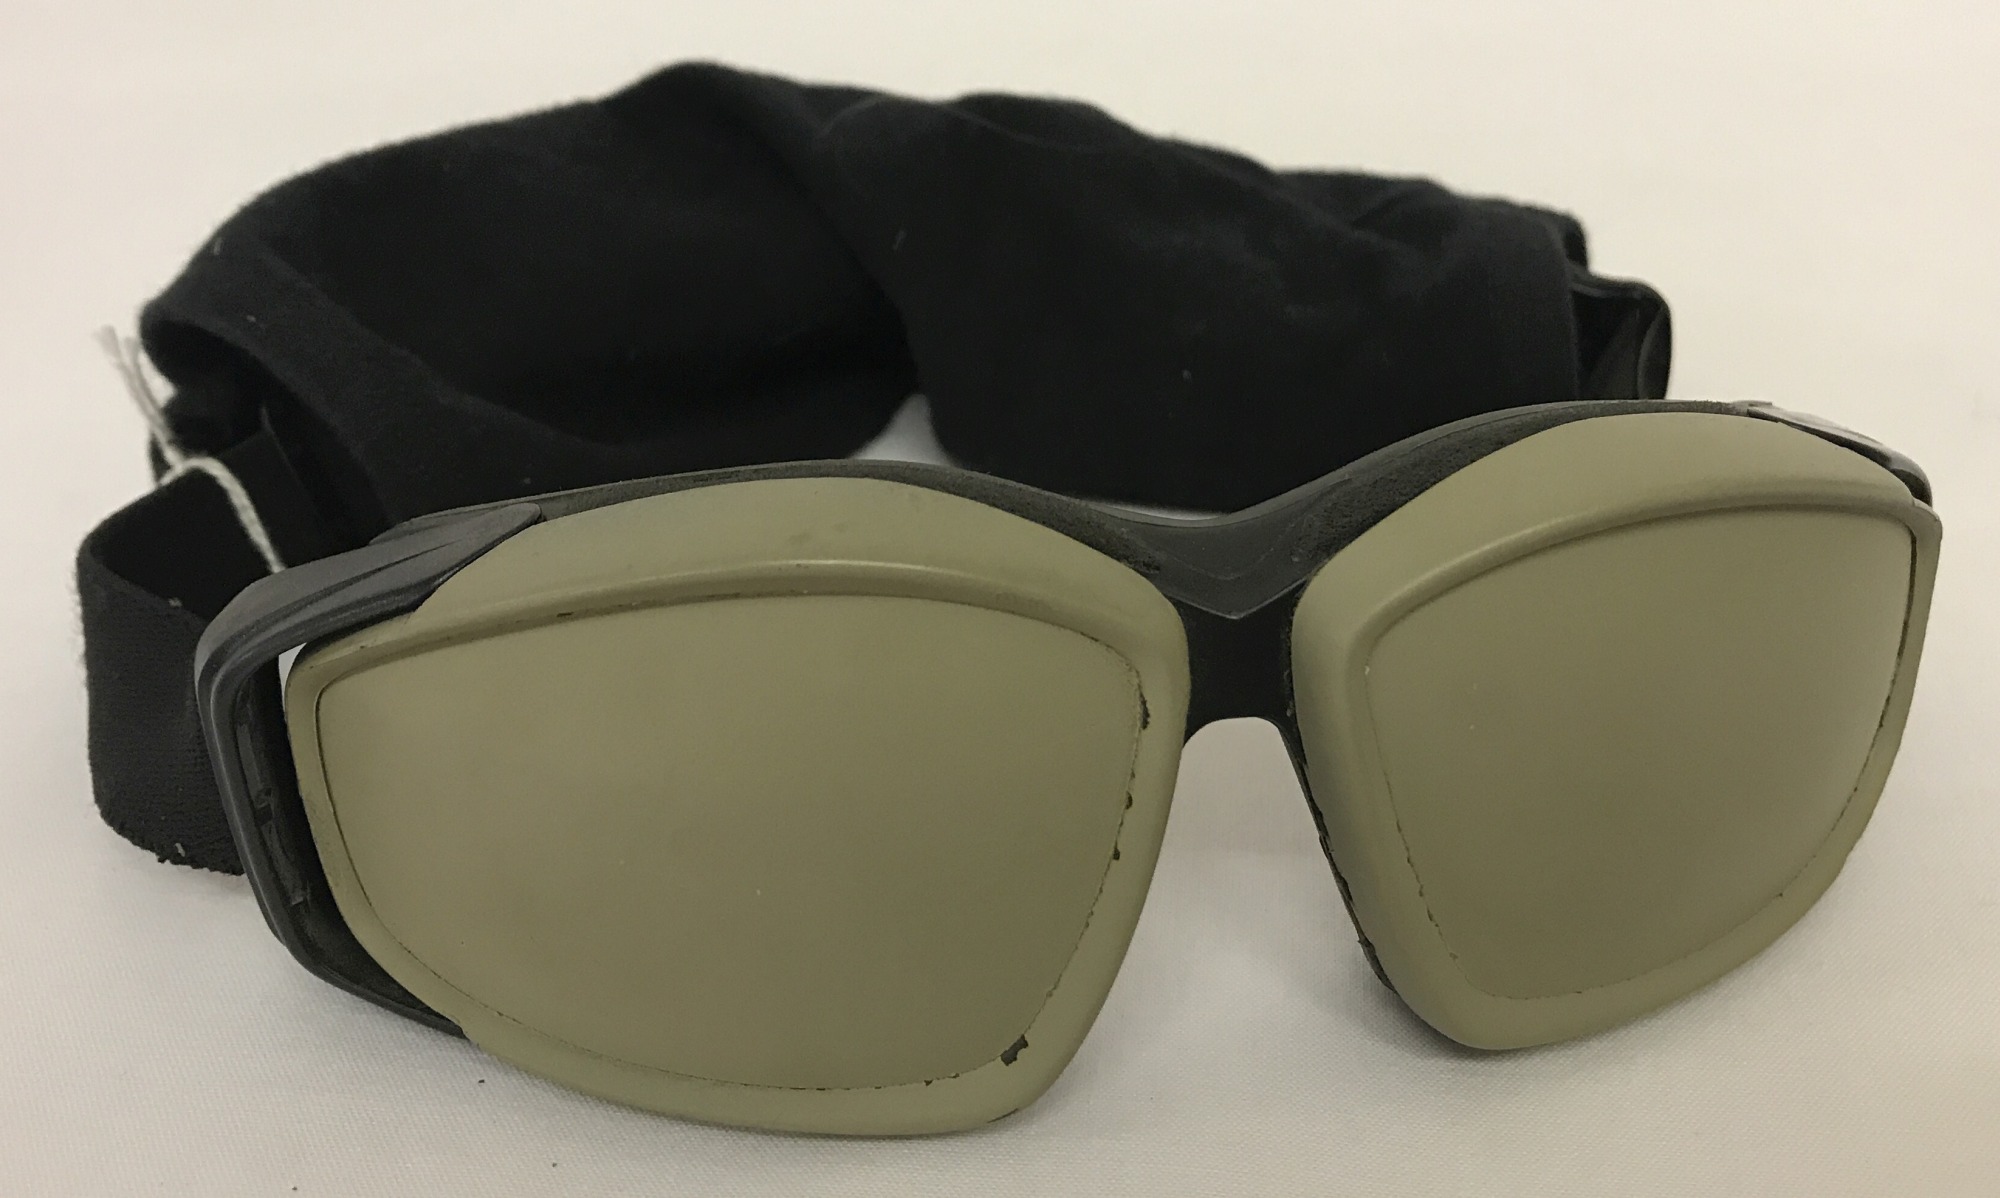 Gulf War Era Painted out goggles, used for blindfolding PoW.